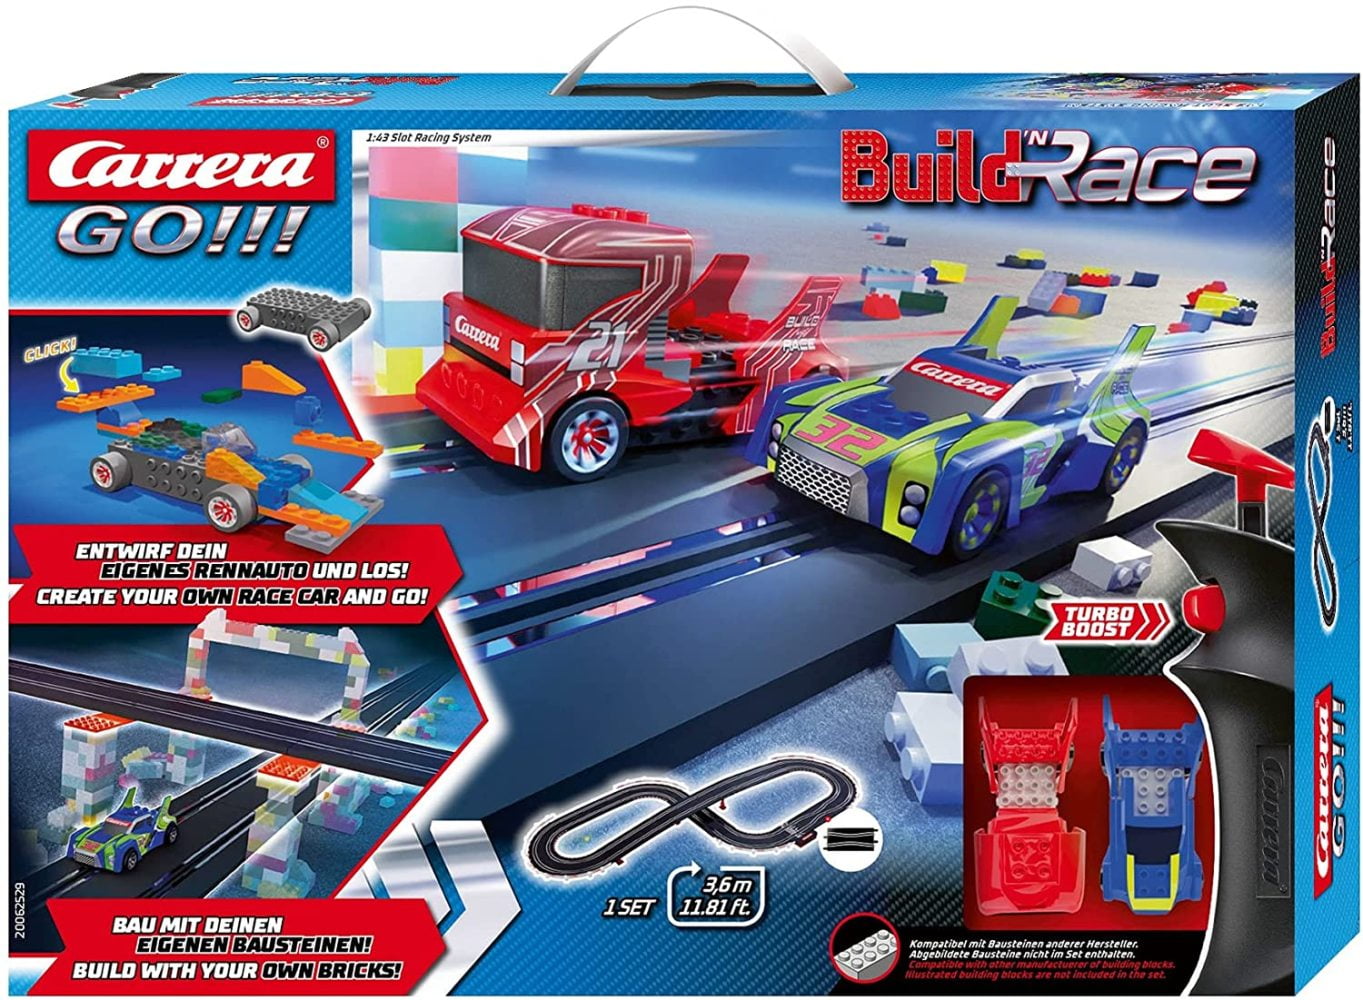 Carrera GO!!! Build N Race 62529 Racing Set  Electric Powered Slot Car  Racing Kids Toy Blocks Race Track Set Includes 2 Hand Controllers and 2  Cars in 1:43 Scale 